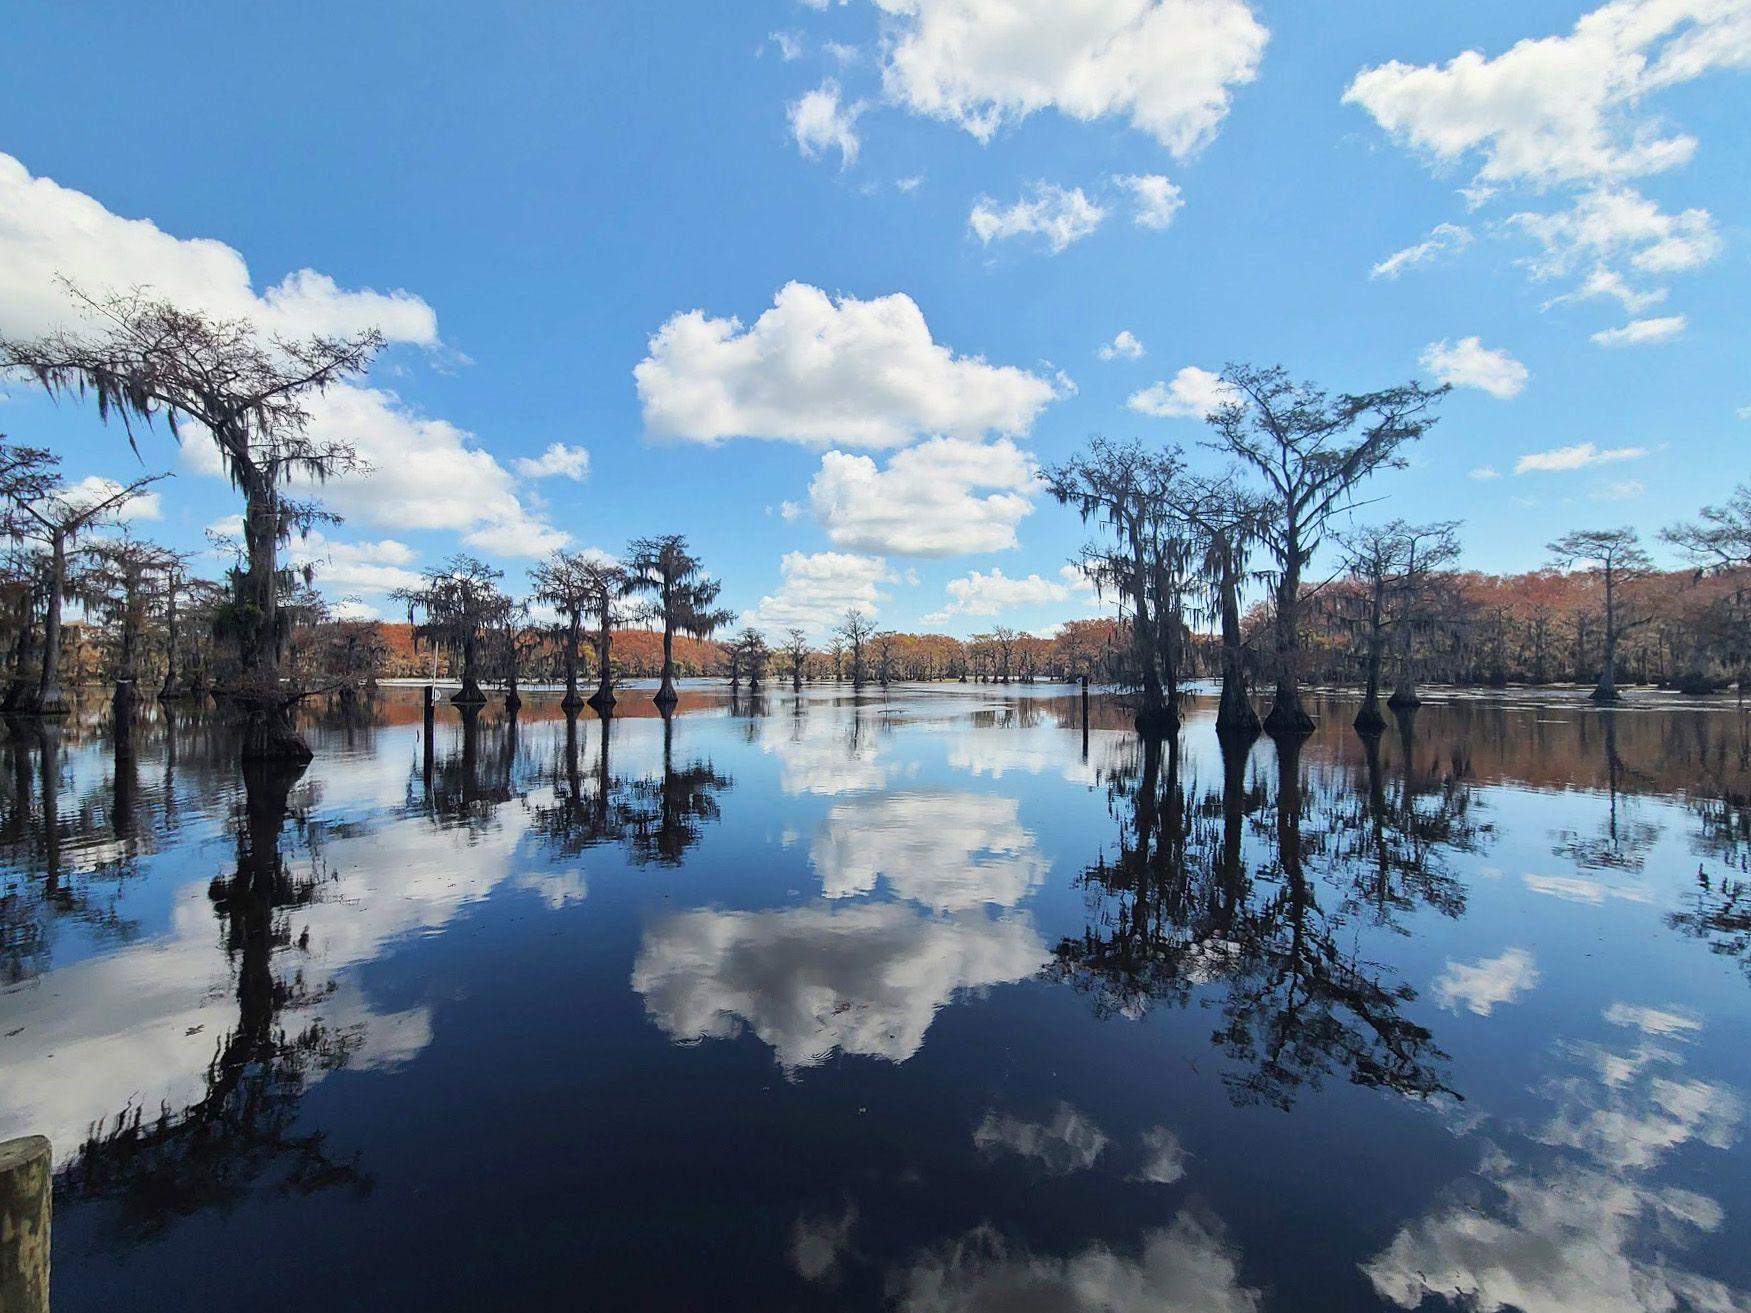 A view of Caddo Lake from Uncertain, Texas. The trees and clouds reflect down into the still water and many of the trees look red.